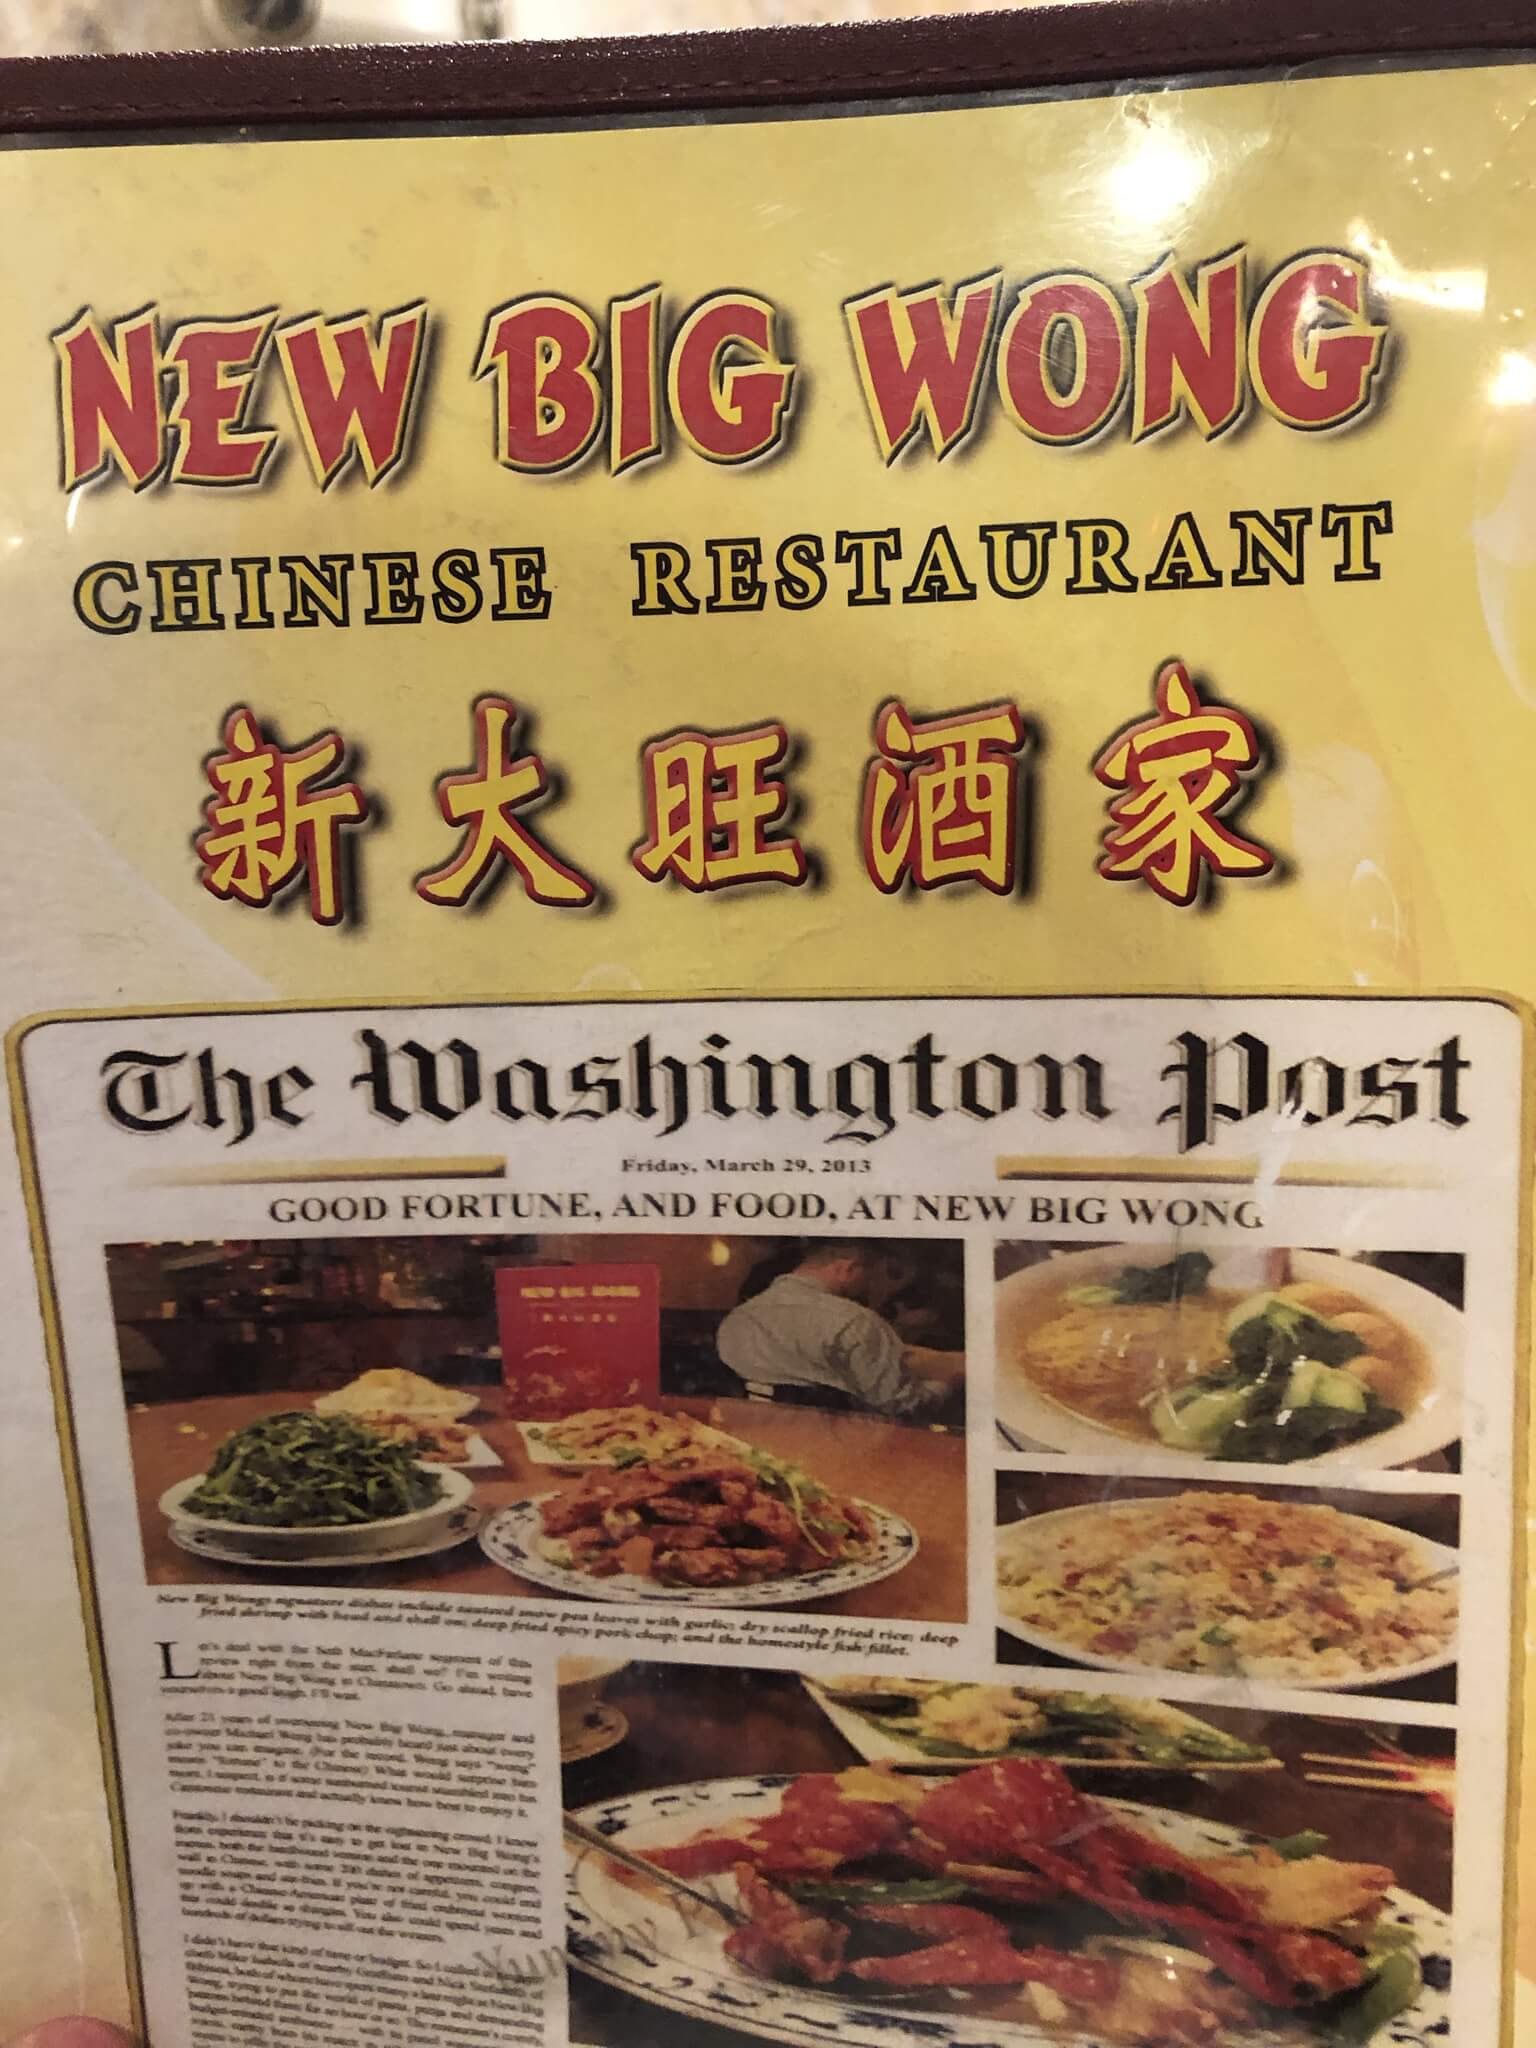 The Chinese always have the best restaurant names… - Meme Fort